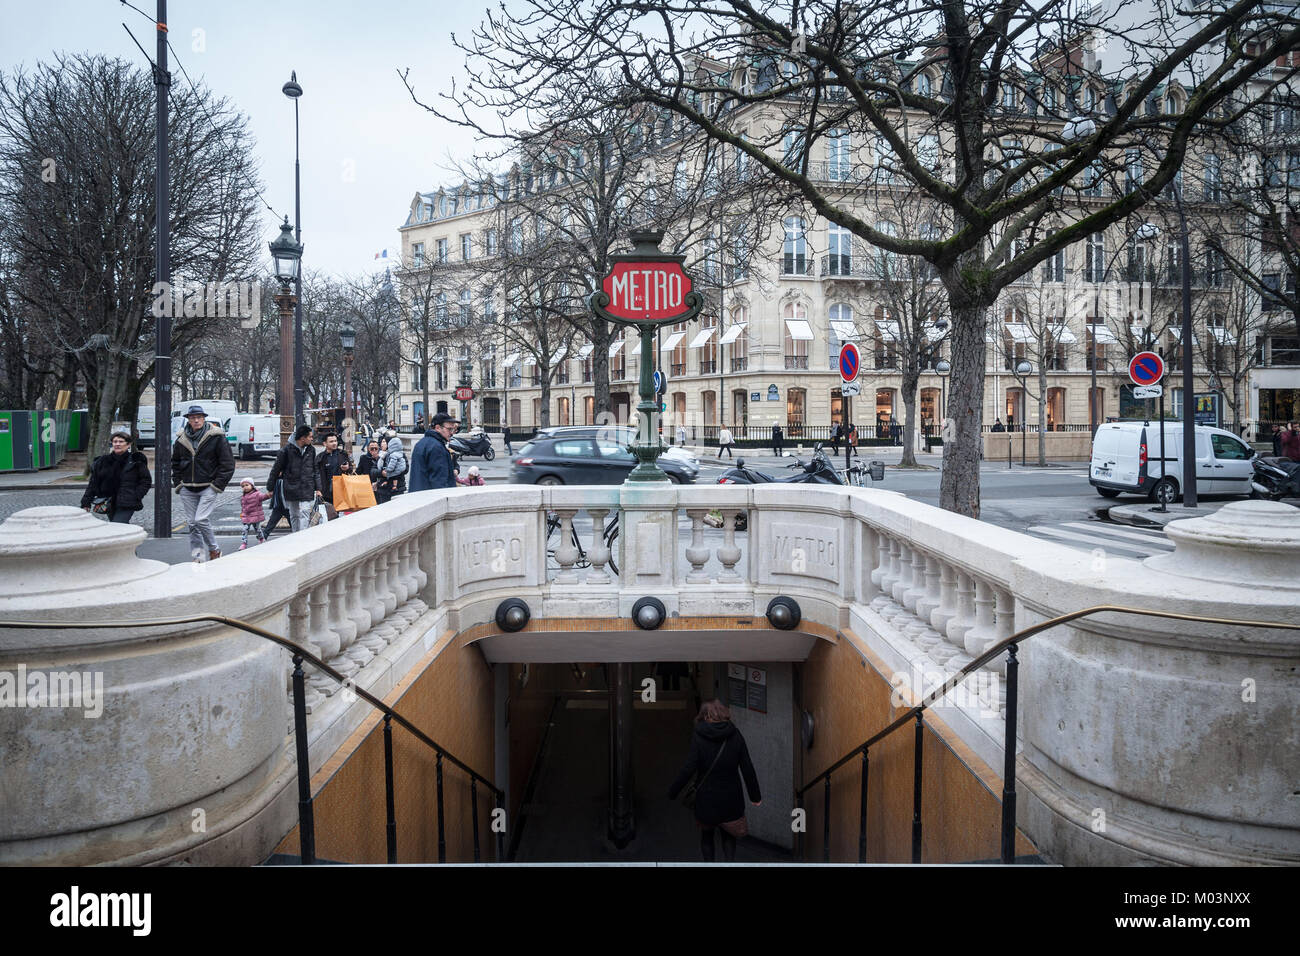 PARIS, FRANCE - DECEMBER 20, 2017: Paris Metro Station on Champs Elysees avenue with a typical old time Metro sign combined to a street lamp. Paris un Stock Photo